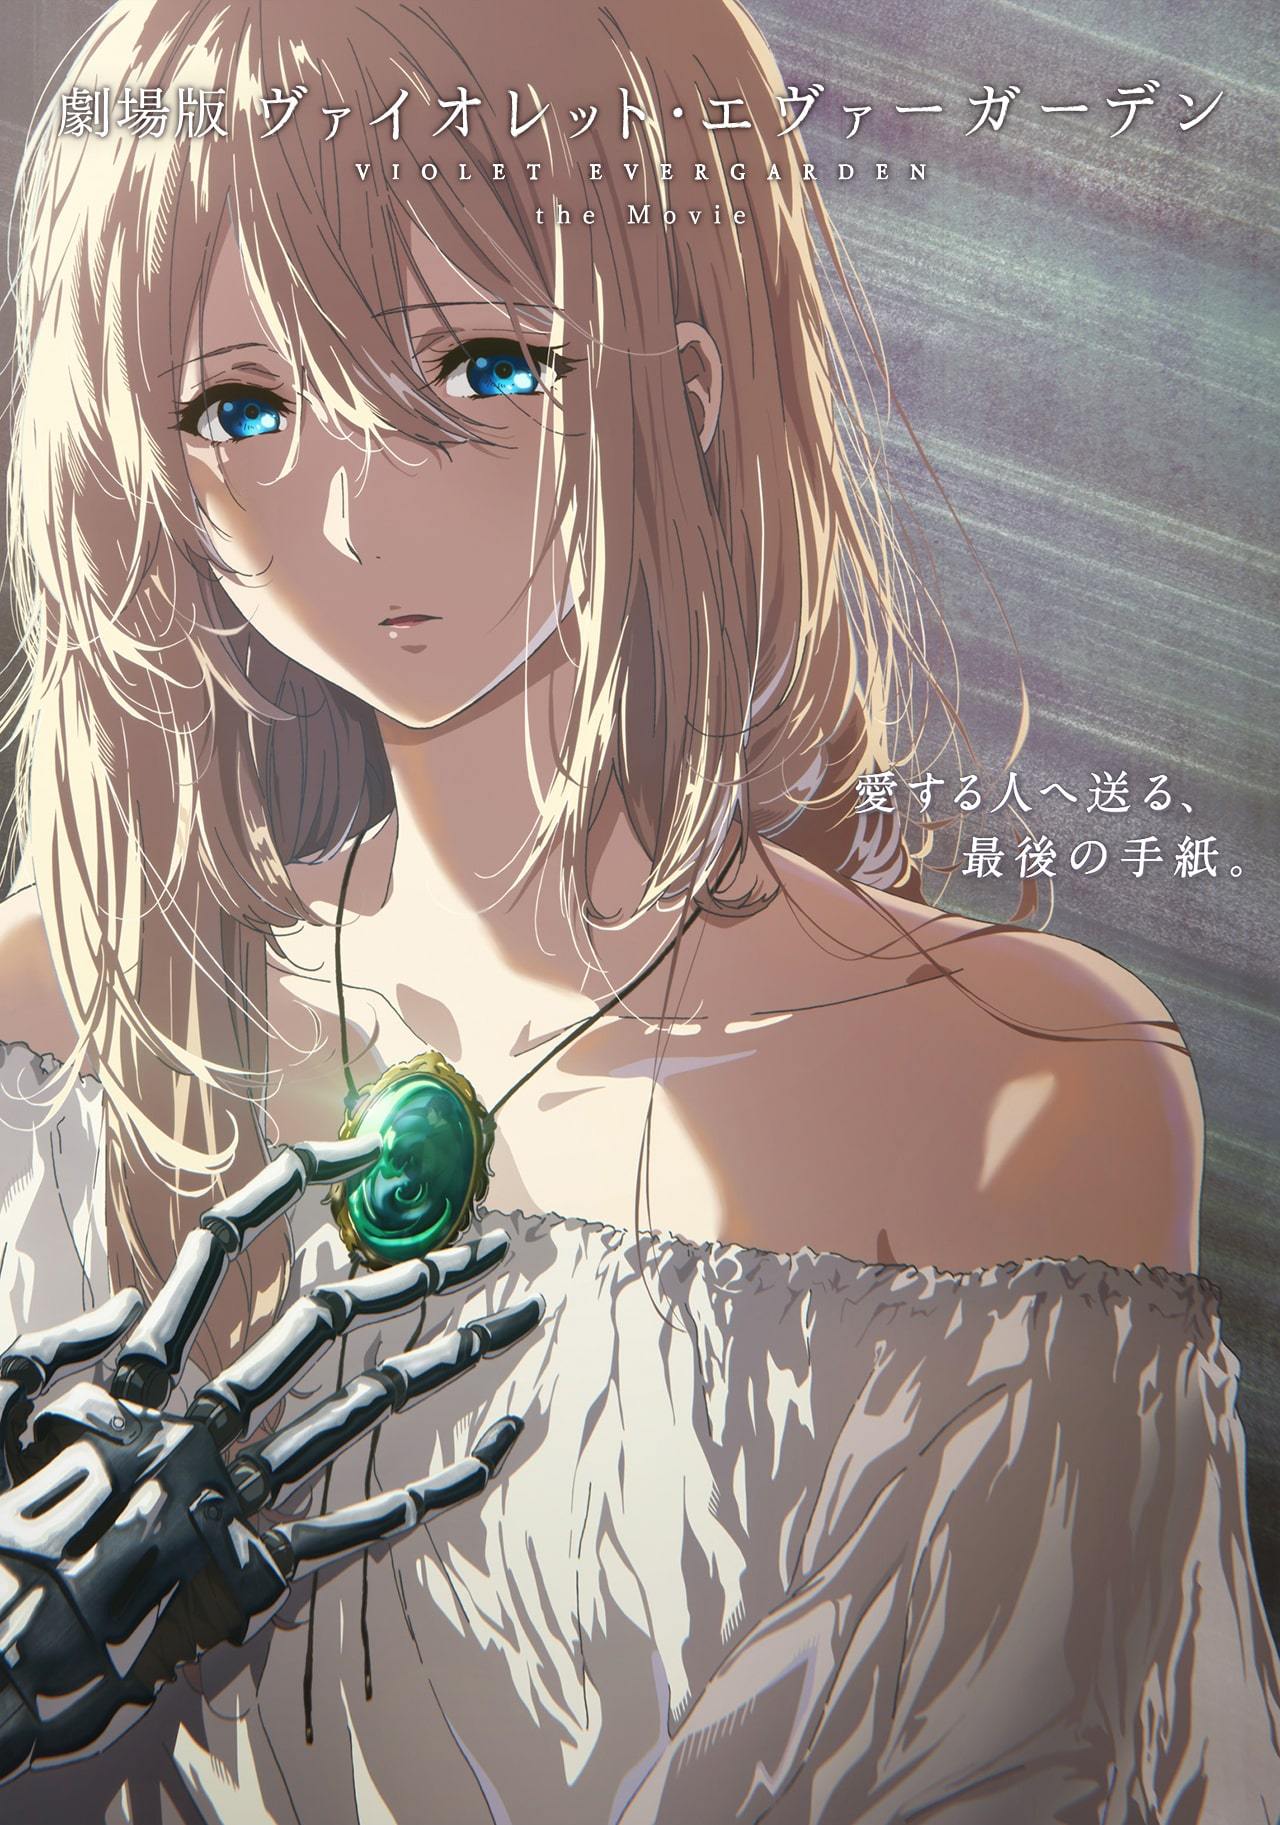 The official website to the âViolet Evergarden: The Movieâ has unveiled its latest poster visual. Itâll open in theaters January 10th, 2020. In addition, the side-story âViolet Evergarden Gaidenâ will also been shown in theaters for a 2-week limited...